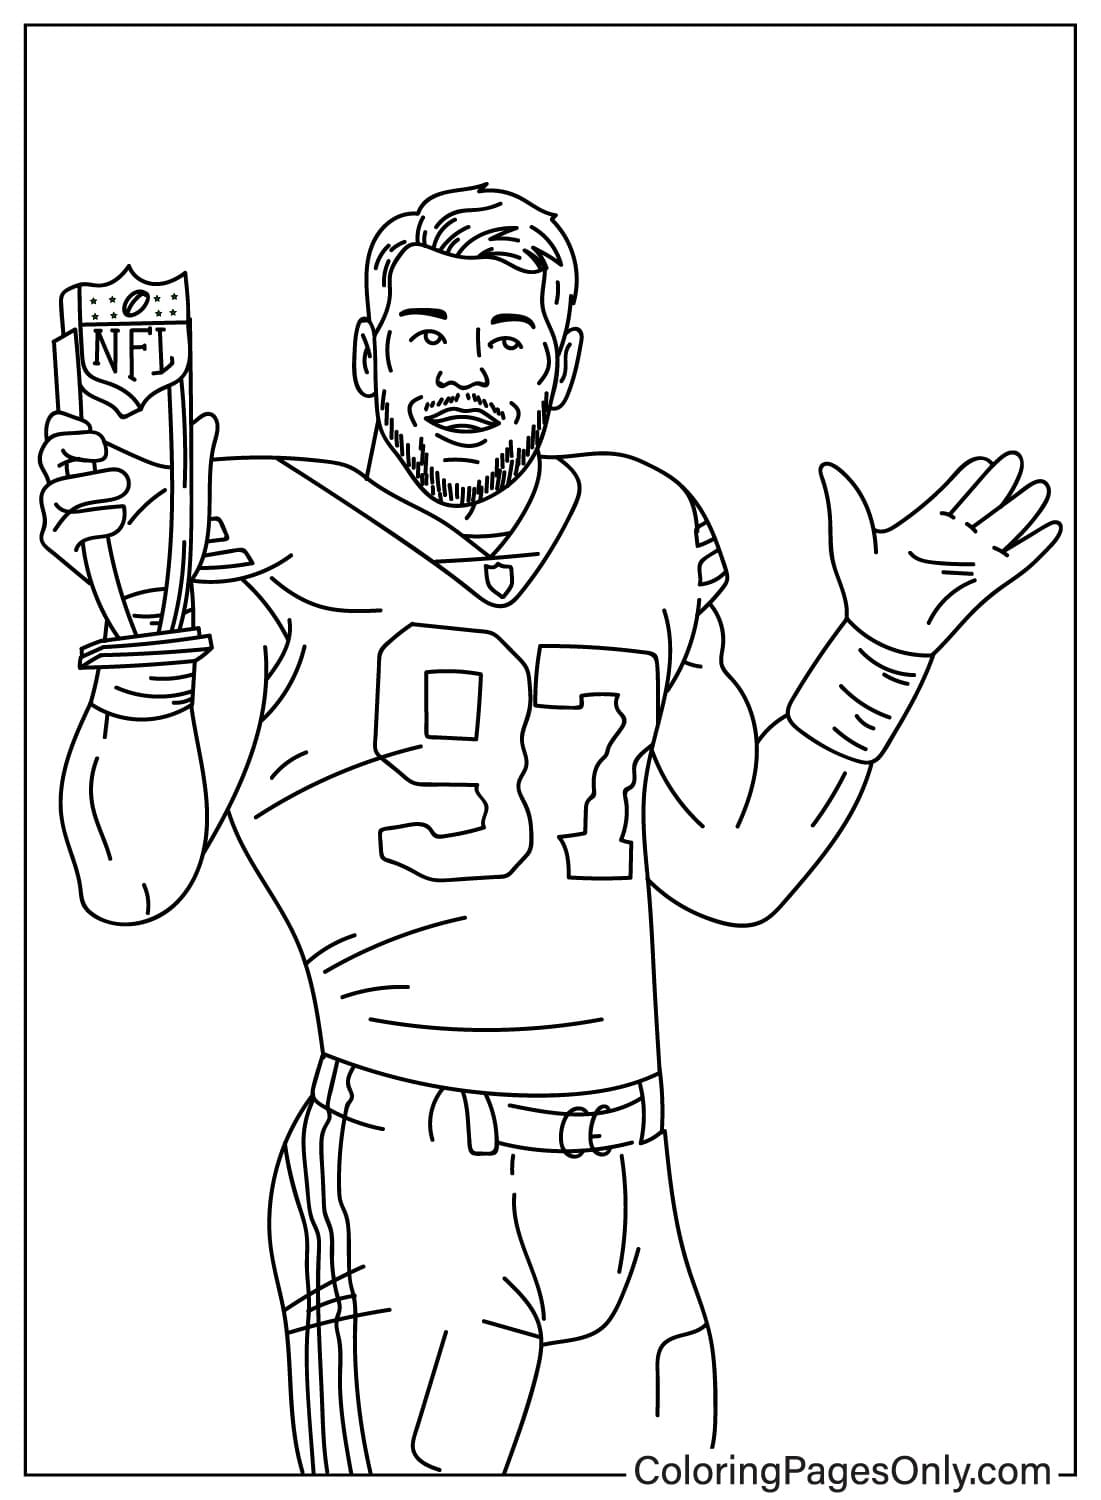 Nick Bosa Coloring Page Free from San Francisco 49ers